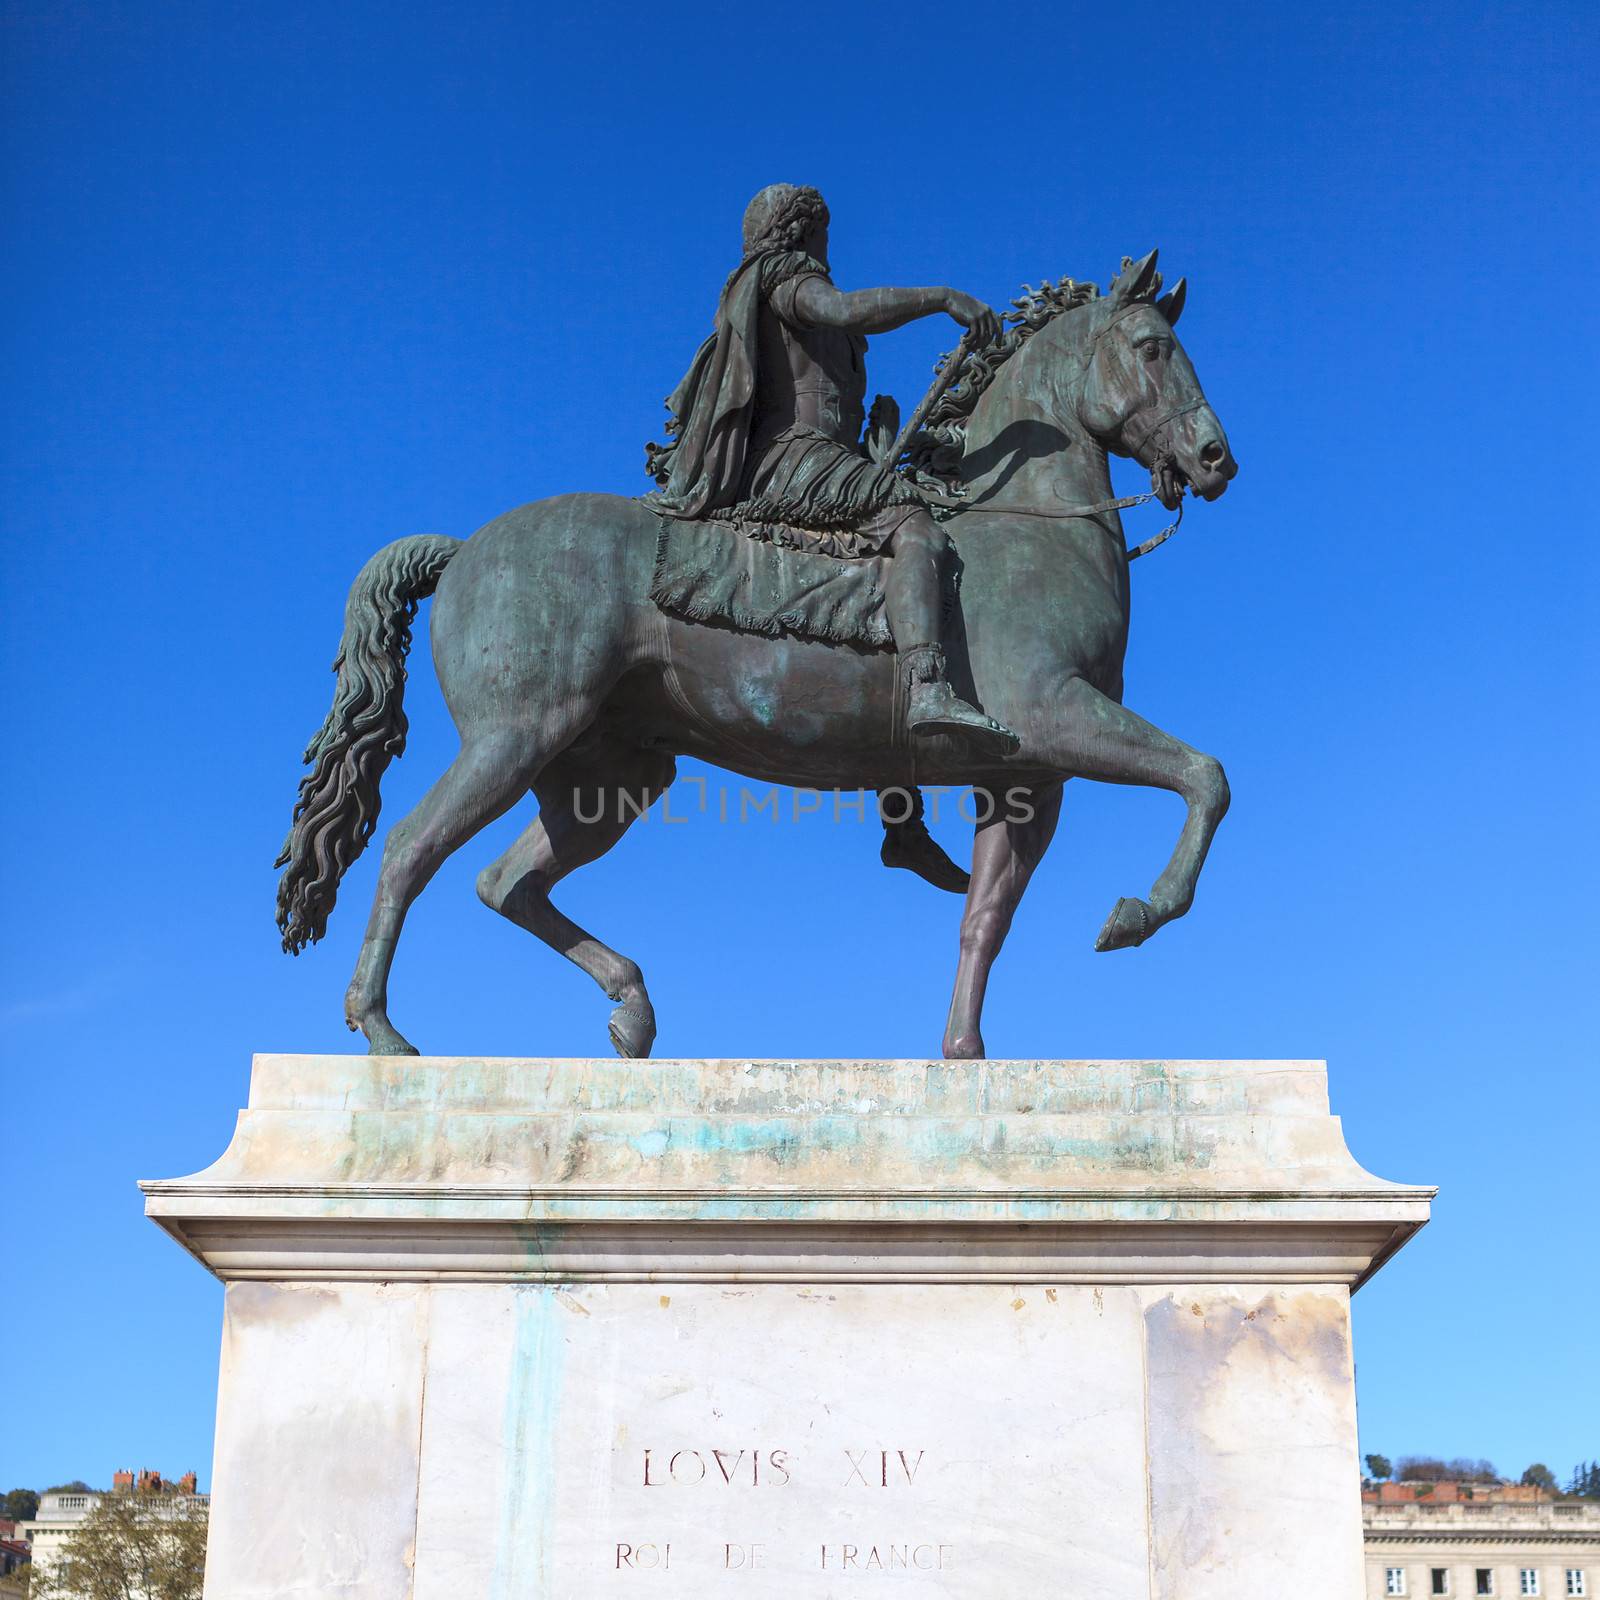 Famous statue of Louis XIV by vwalakte